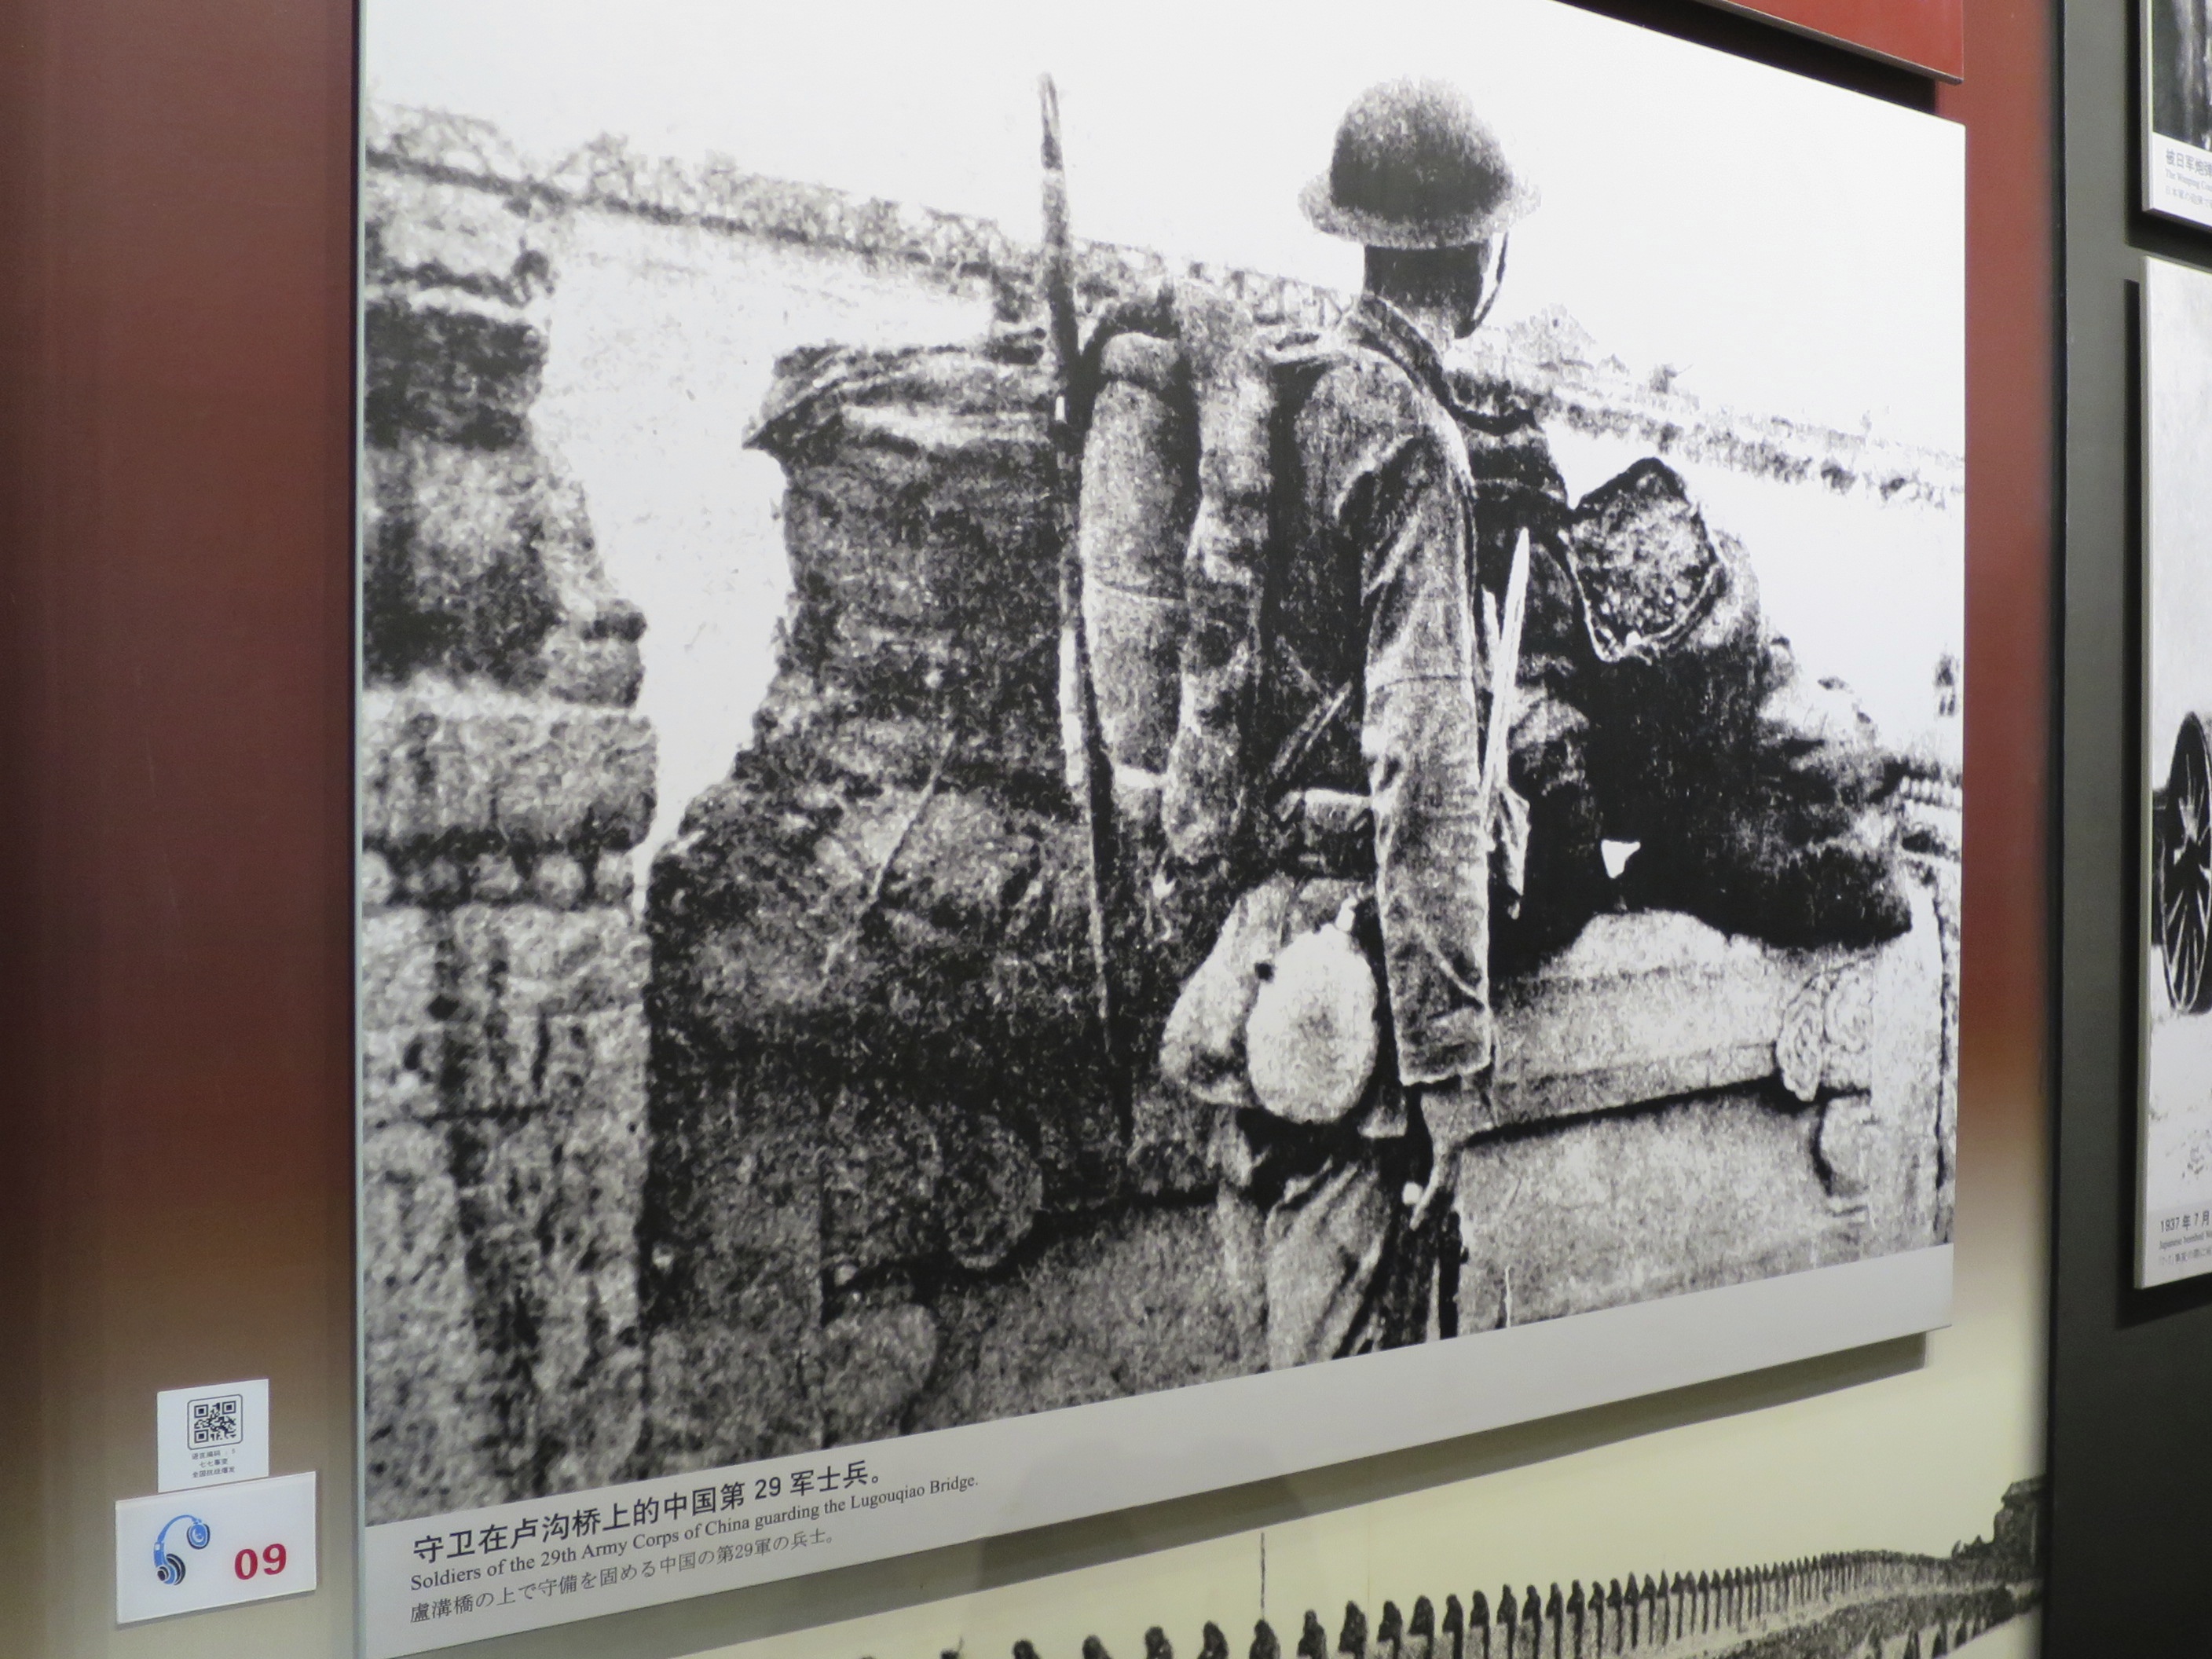 2.	ROC soldier guards Marco Polo Bridge, mid-1930s (est.). From Chinese People’s Anti-Japanese War Museum, Wanping. Source: Author’s Collection, 2014.